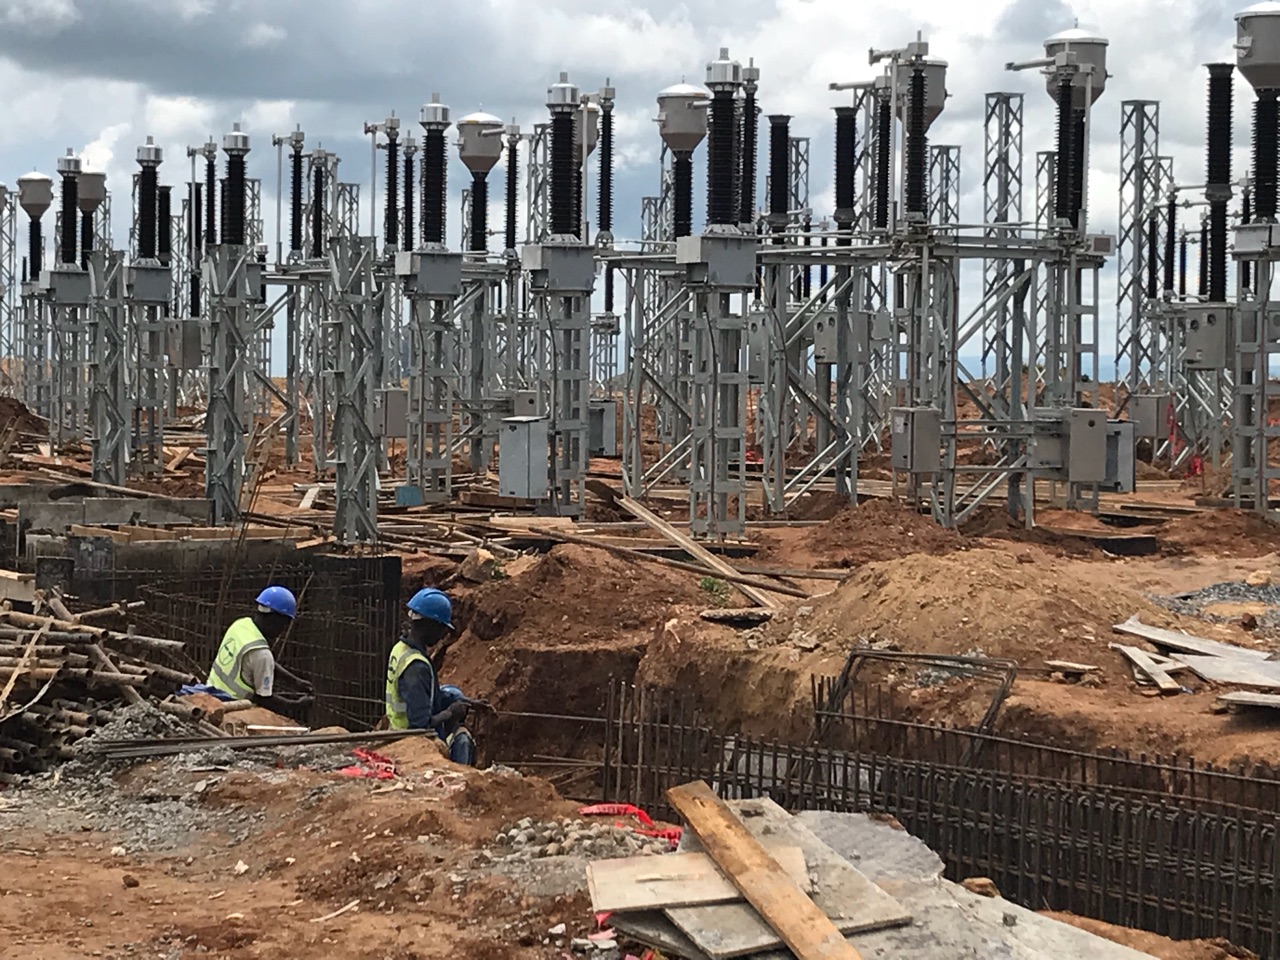 Construction workers building substation